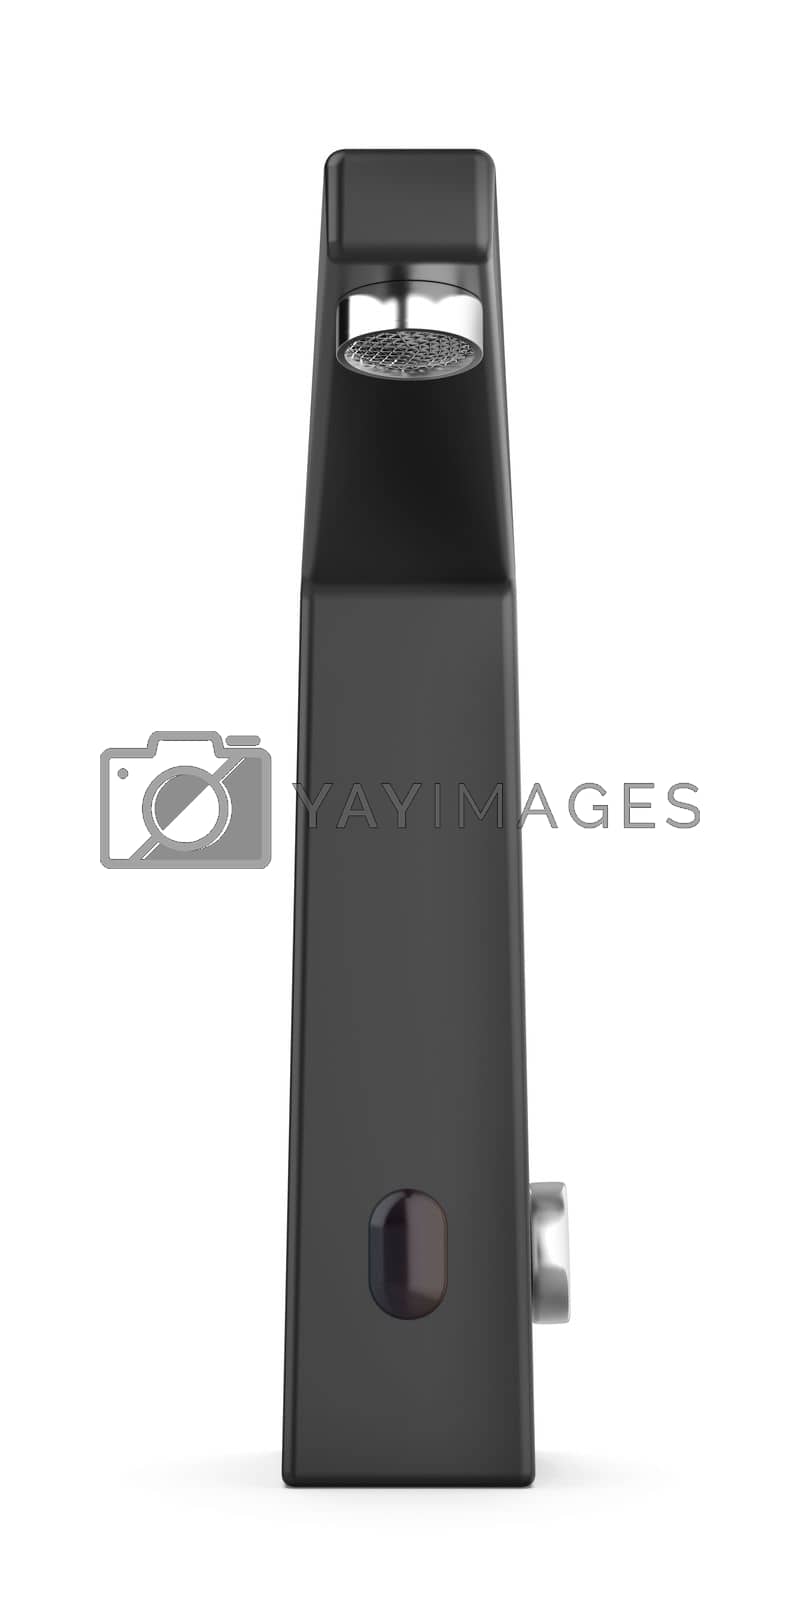 Royalty free image of Matte black sensor faucet by magraphics